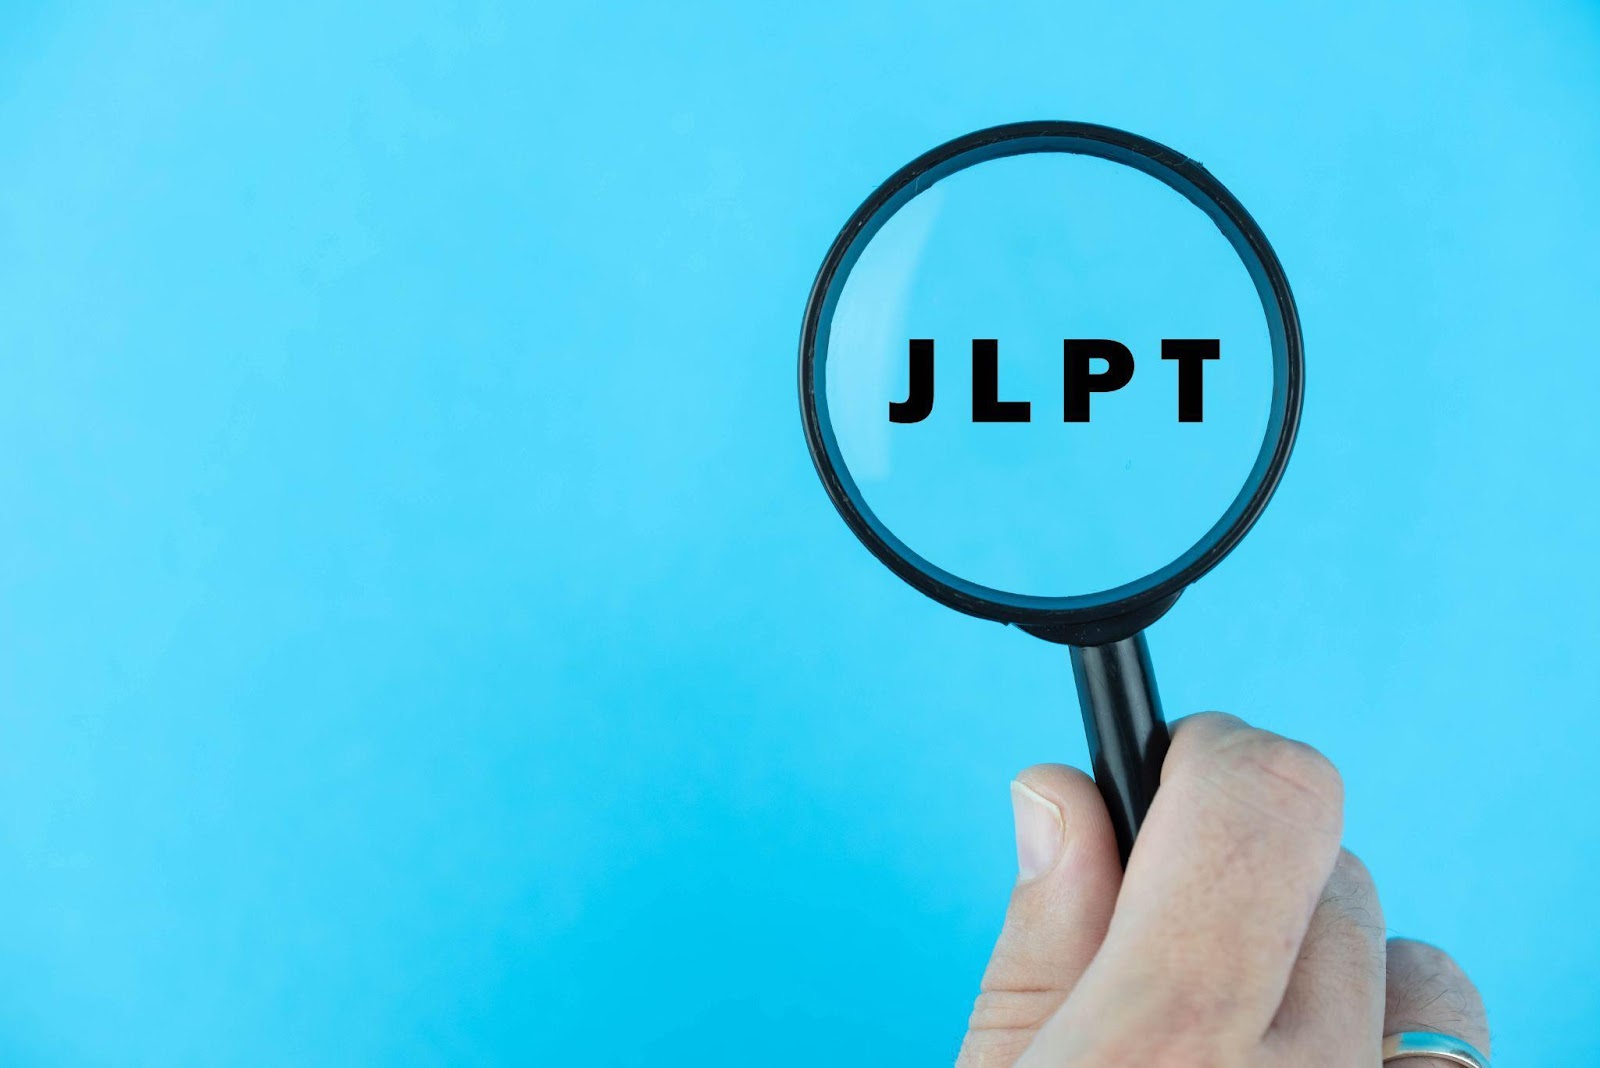 JLPT Test Series: Part 1 - What is the JLPT Test and Why People Take It